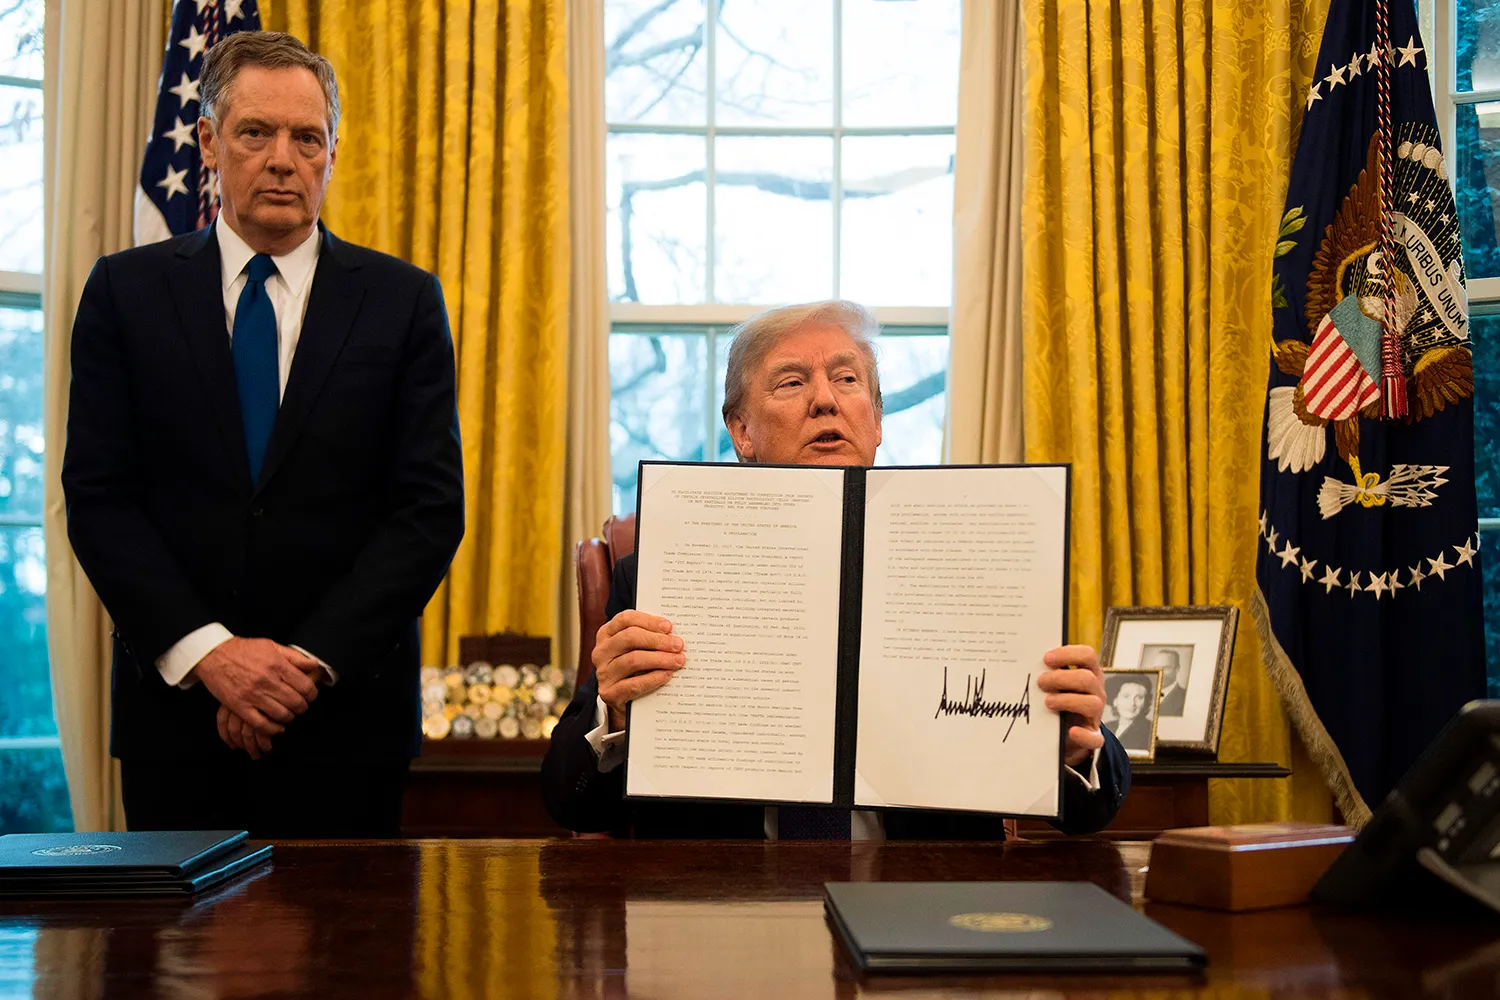 Lighthizer in a suit and tie stands behind a seated Trump who holds up a two-page document with his signature on it. Behind them are curtains, window and flag of the Oval Office.